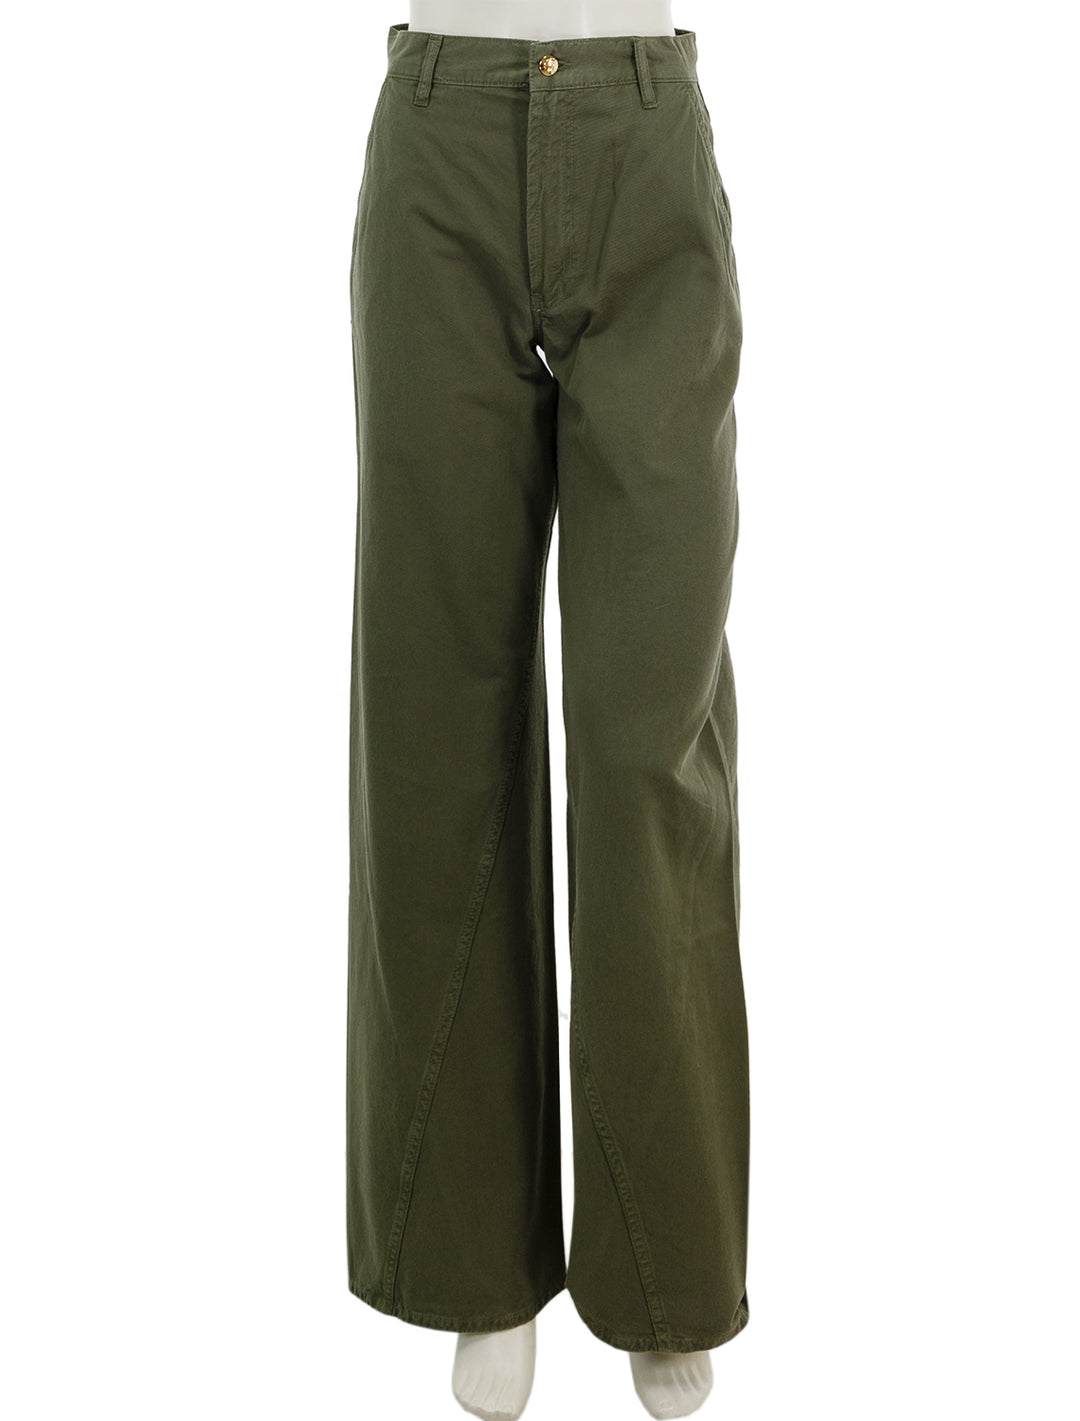 Front view of Anine Bing's briley pant in army green.